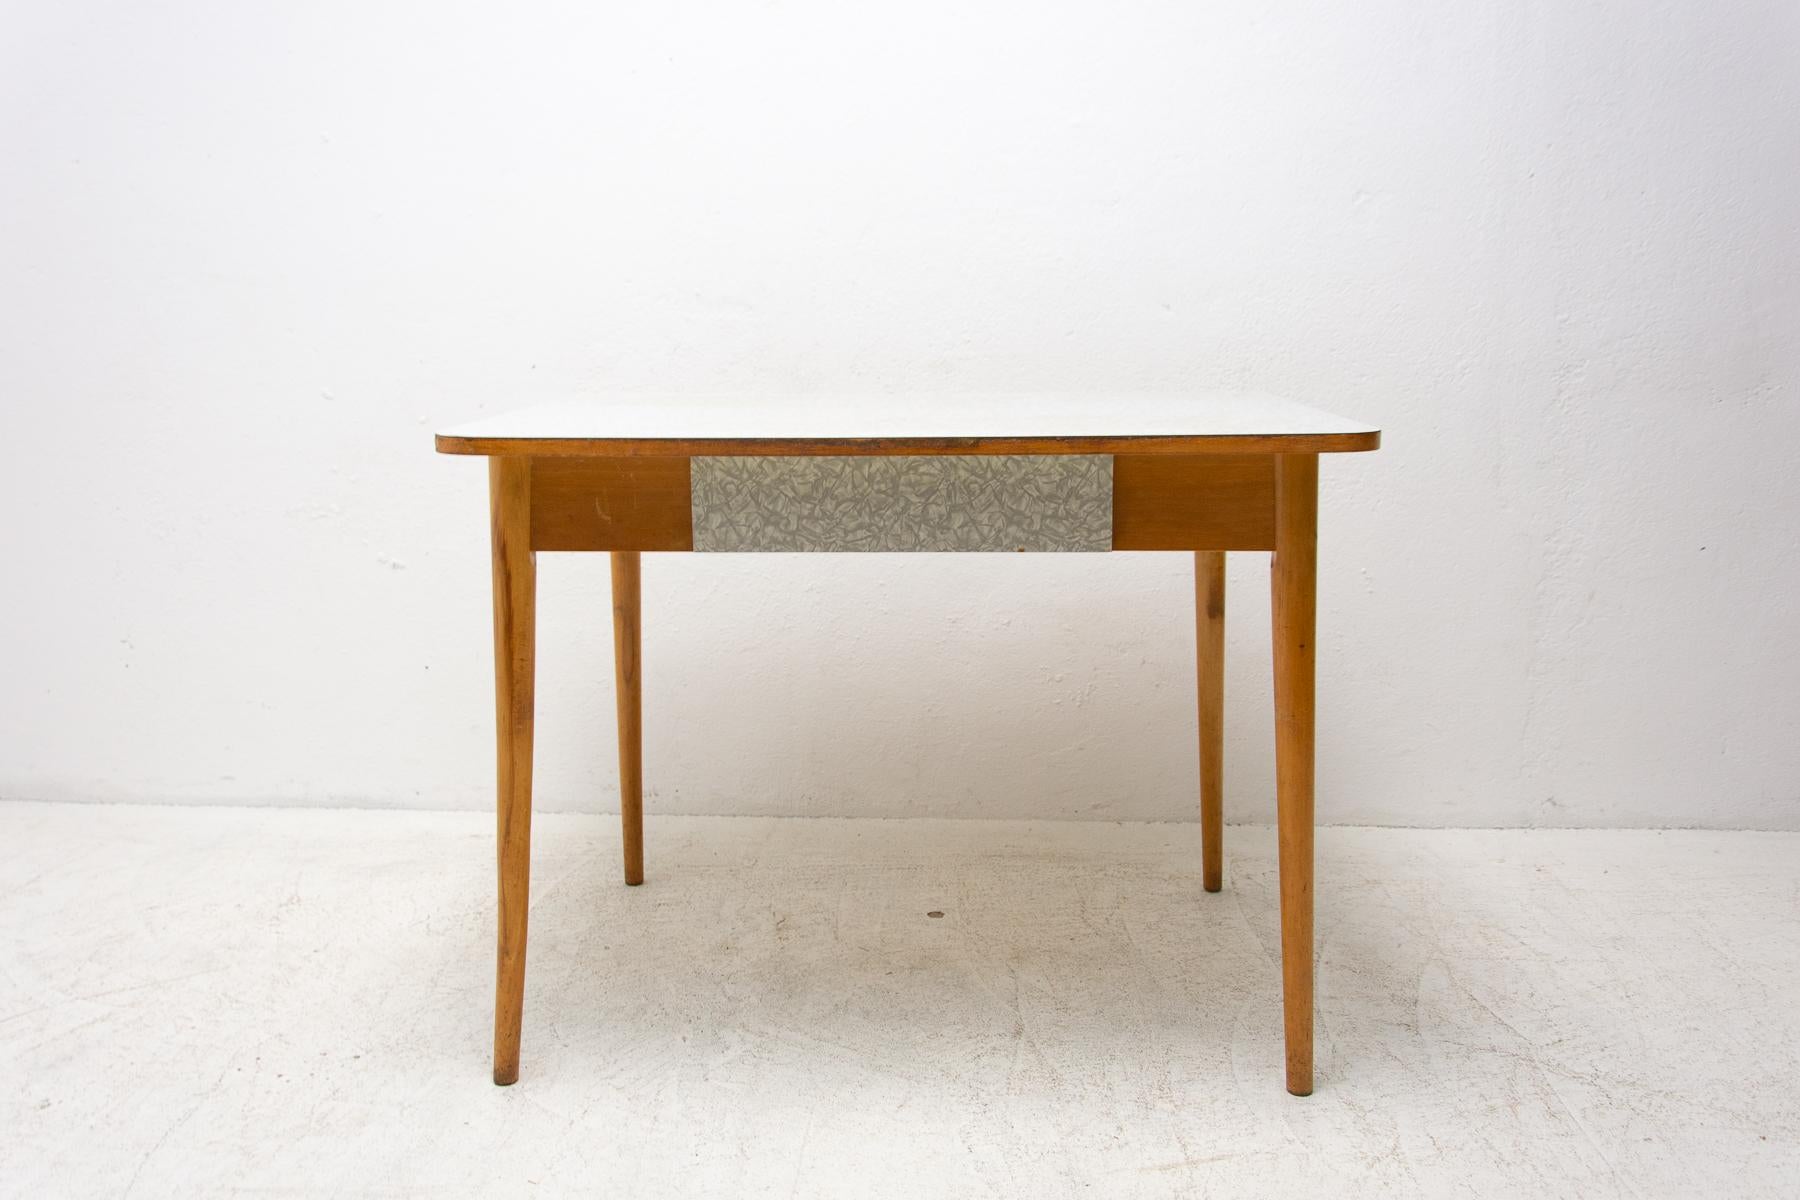  Midcentury Formica and Wood Central Table, Czechoslovakia, 1960's For Sale 8